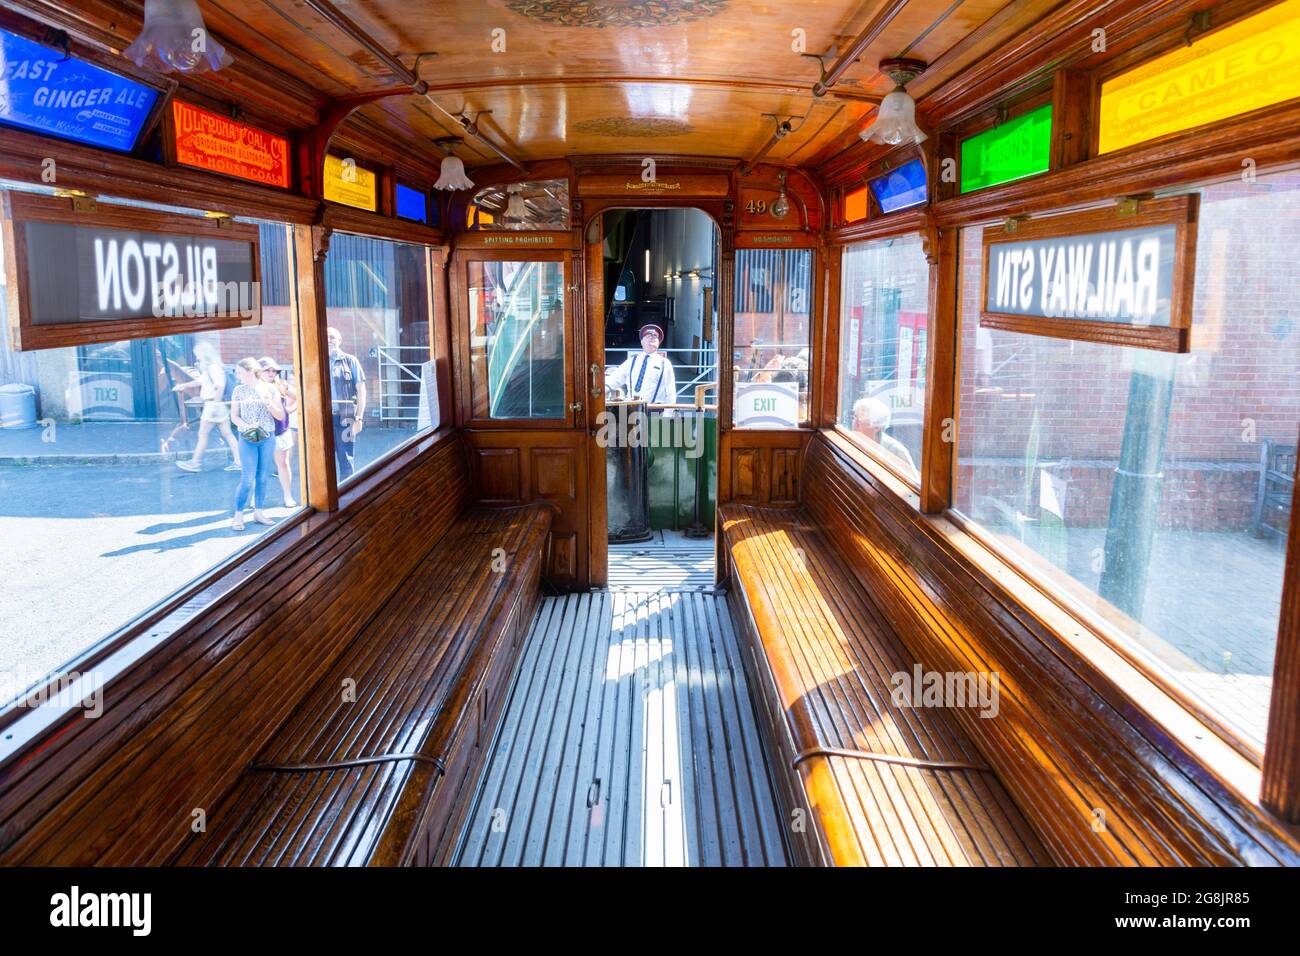 Interior of  tram car with basic seating Stock Photo